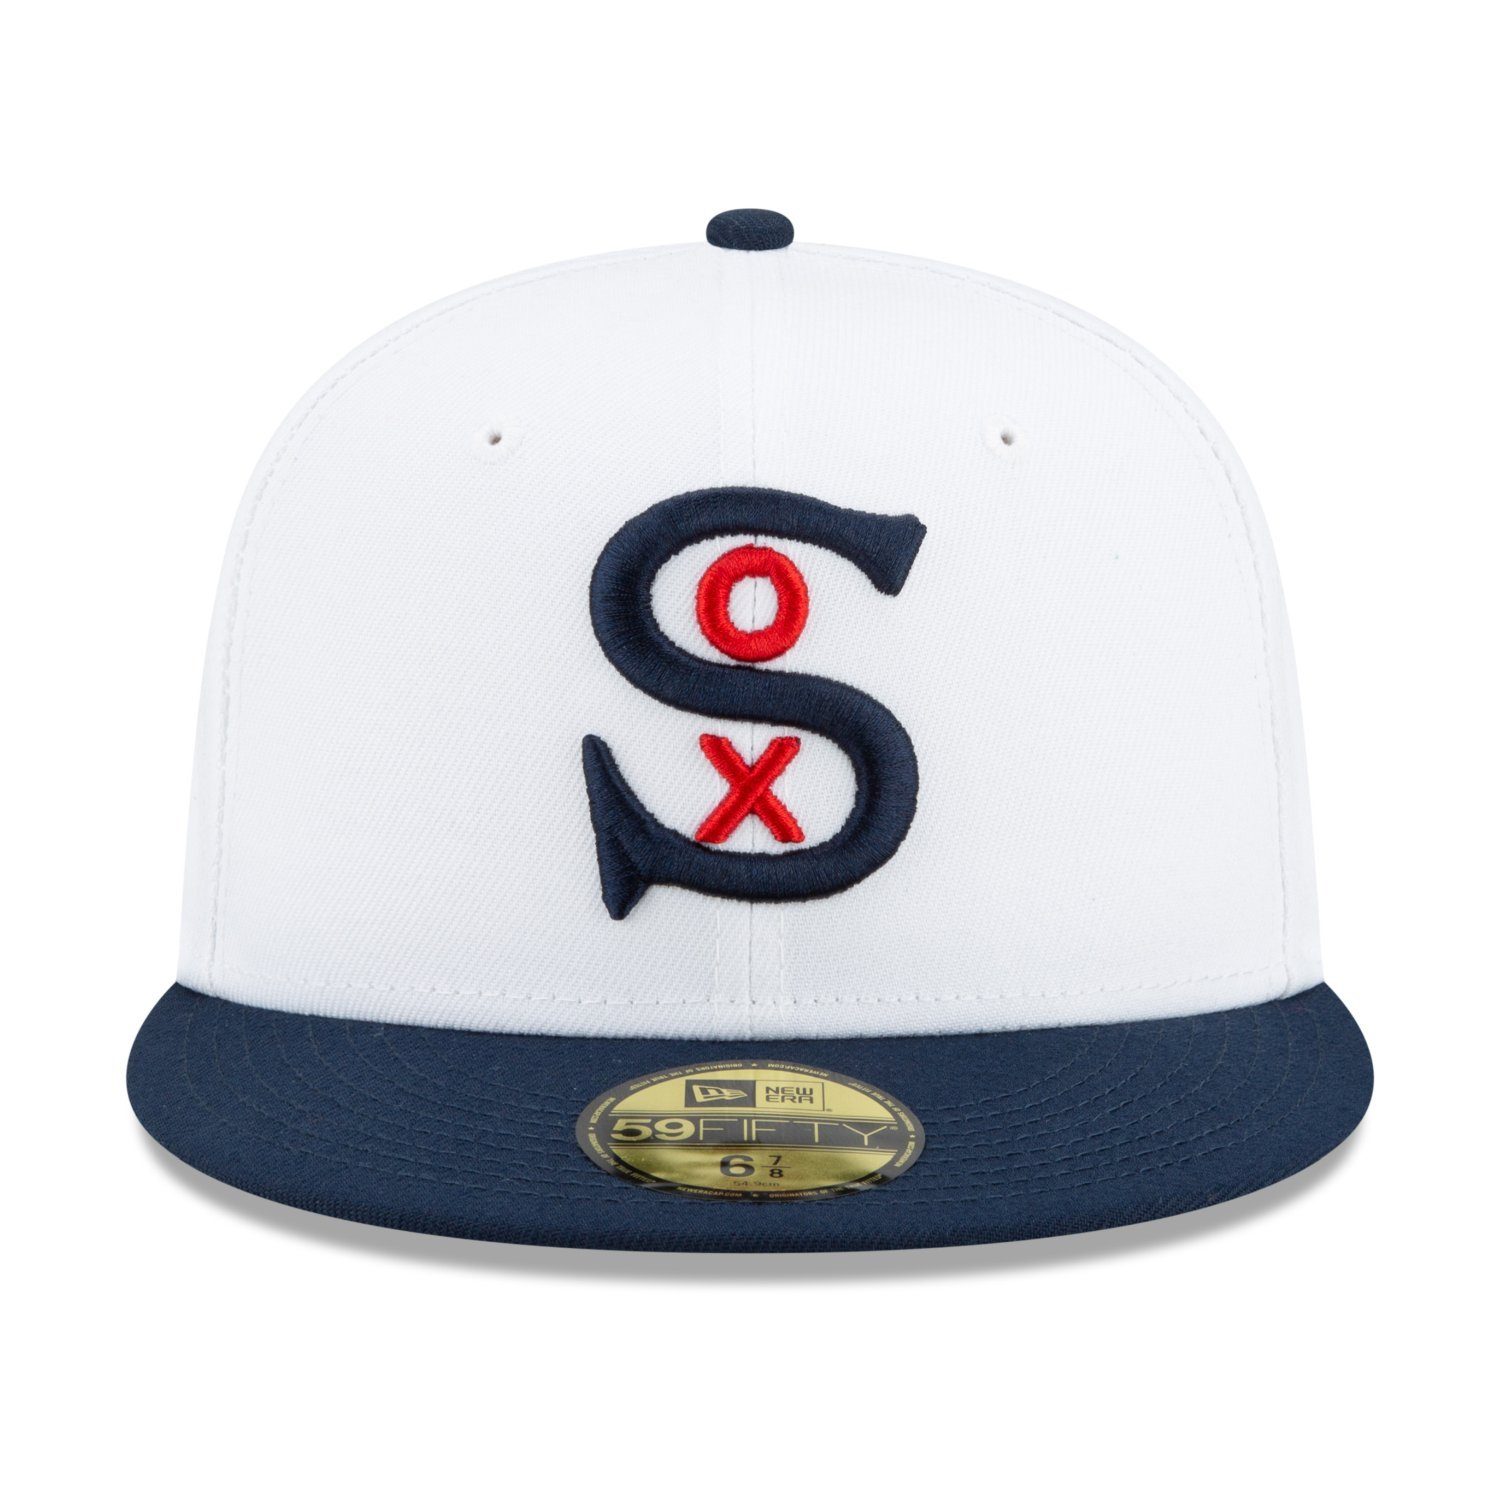 New Era Fitted Cap SERIES White Chicago 59Fifty Sox WORLD